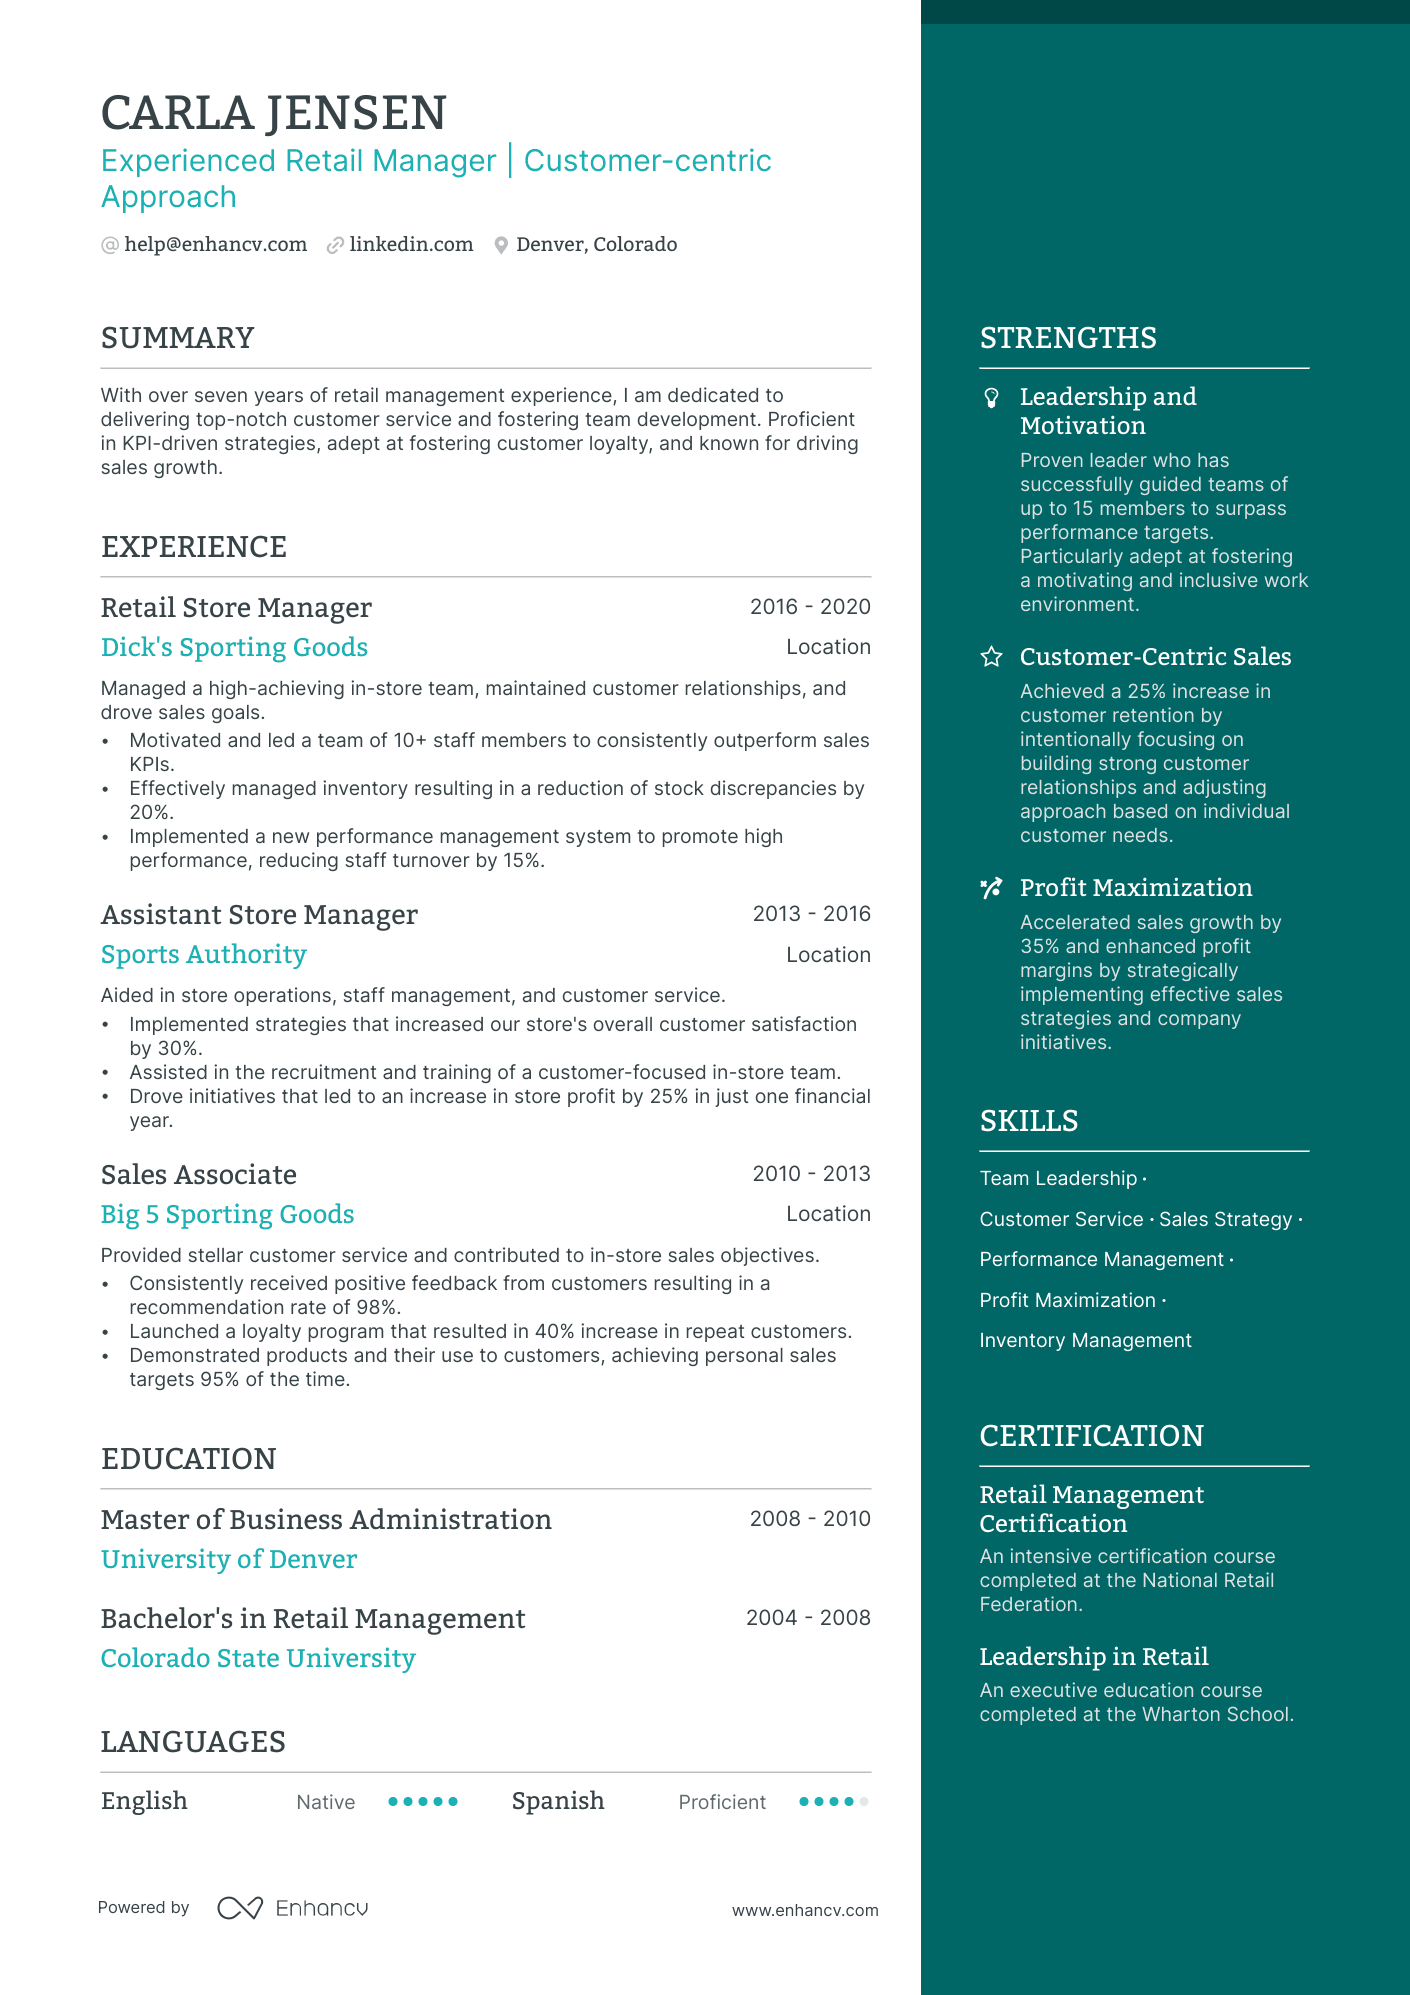 Retail Assistant Manager resume example